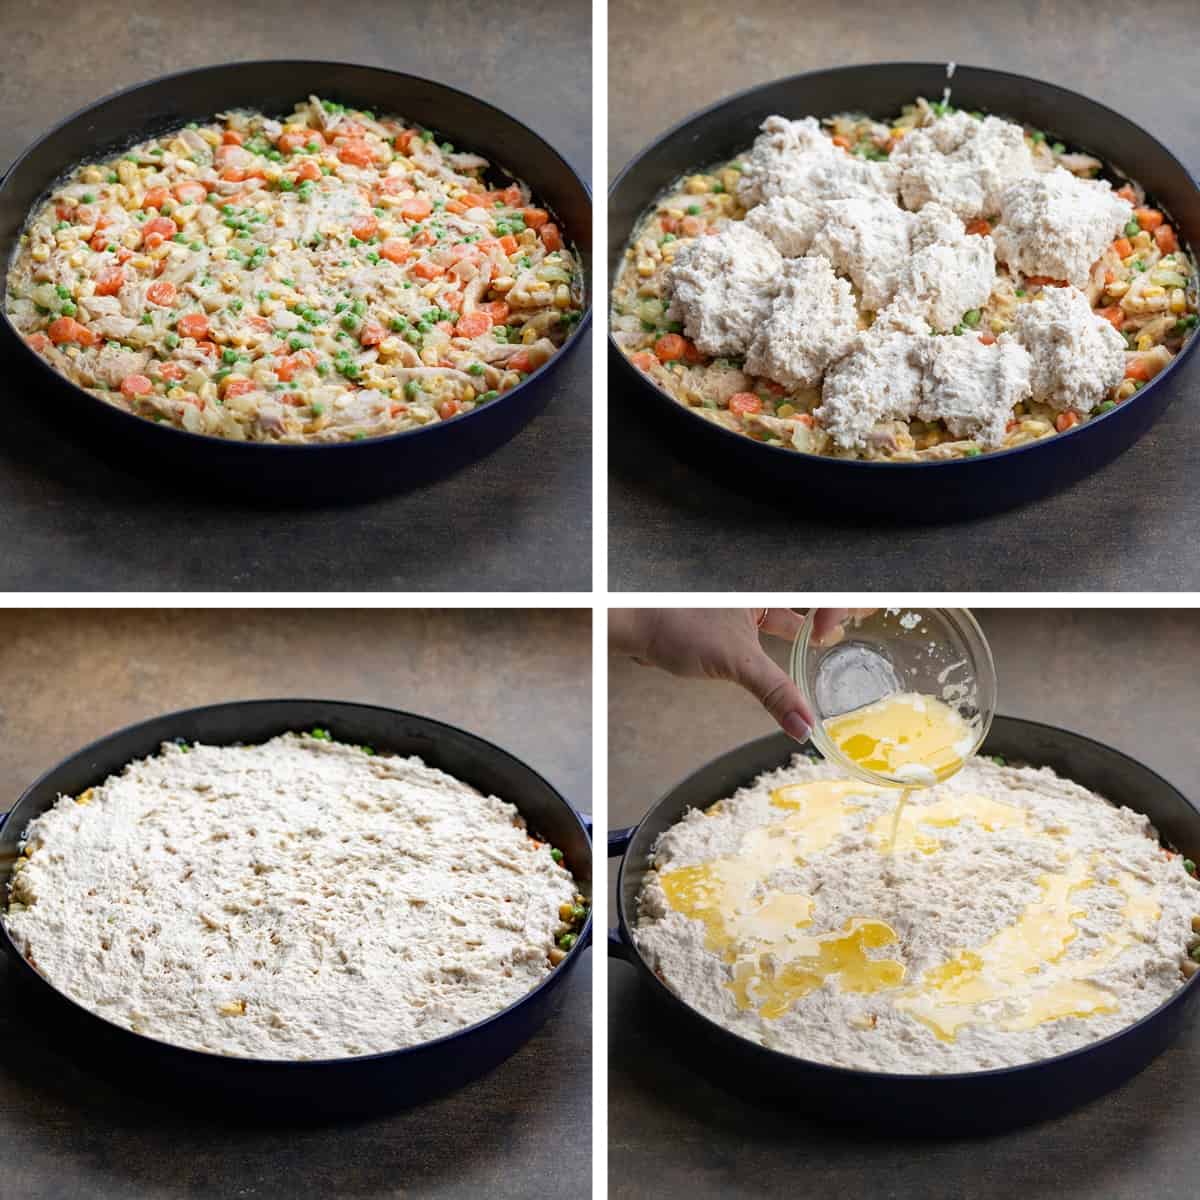 Steps for Making Butter Swim Biscuit Chicken Pot Pie in a Skillet with Filling, Butter Swim Biscuit Batter, and Melted Butter on Top.